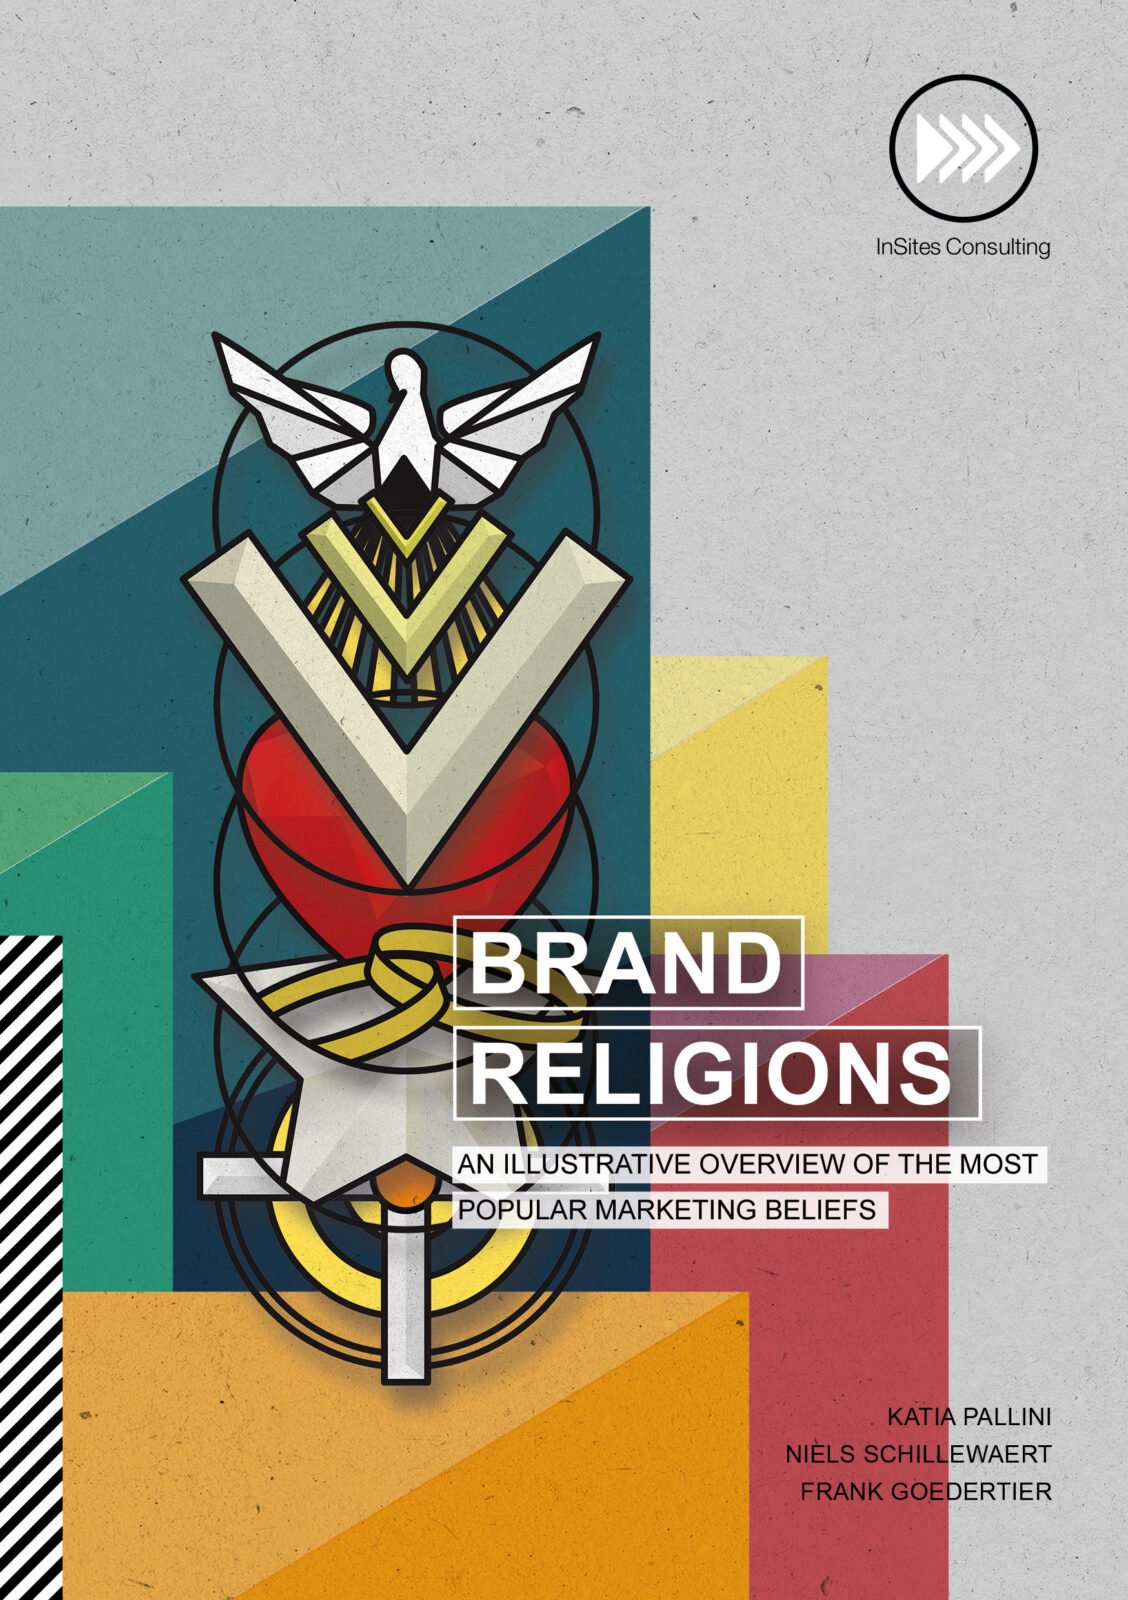 Brand Religions bookzine by InSites Consulting